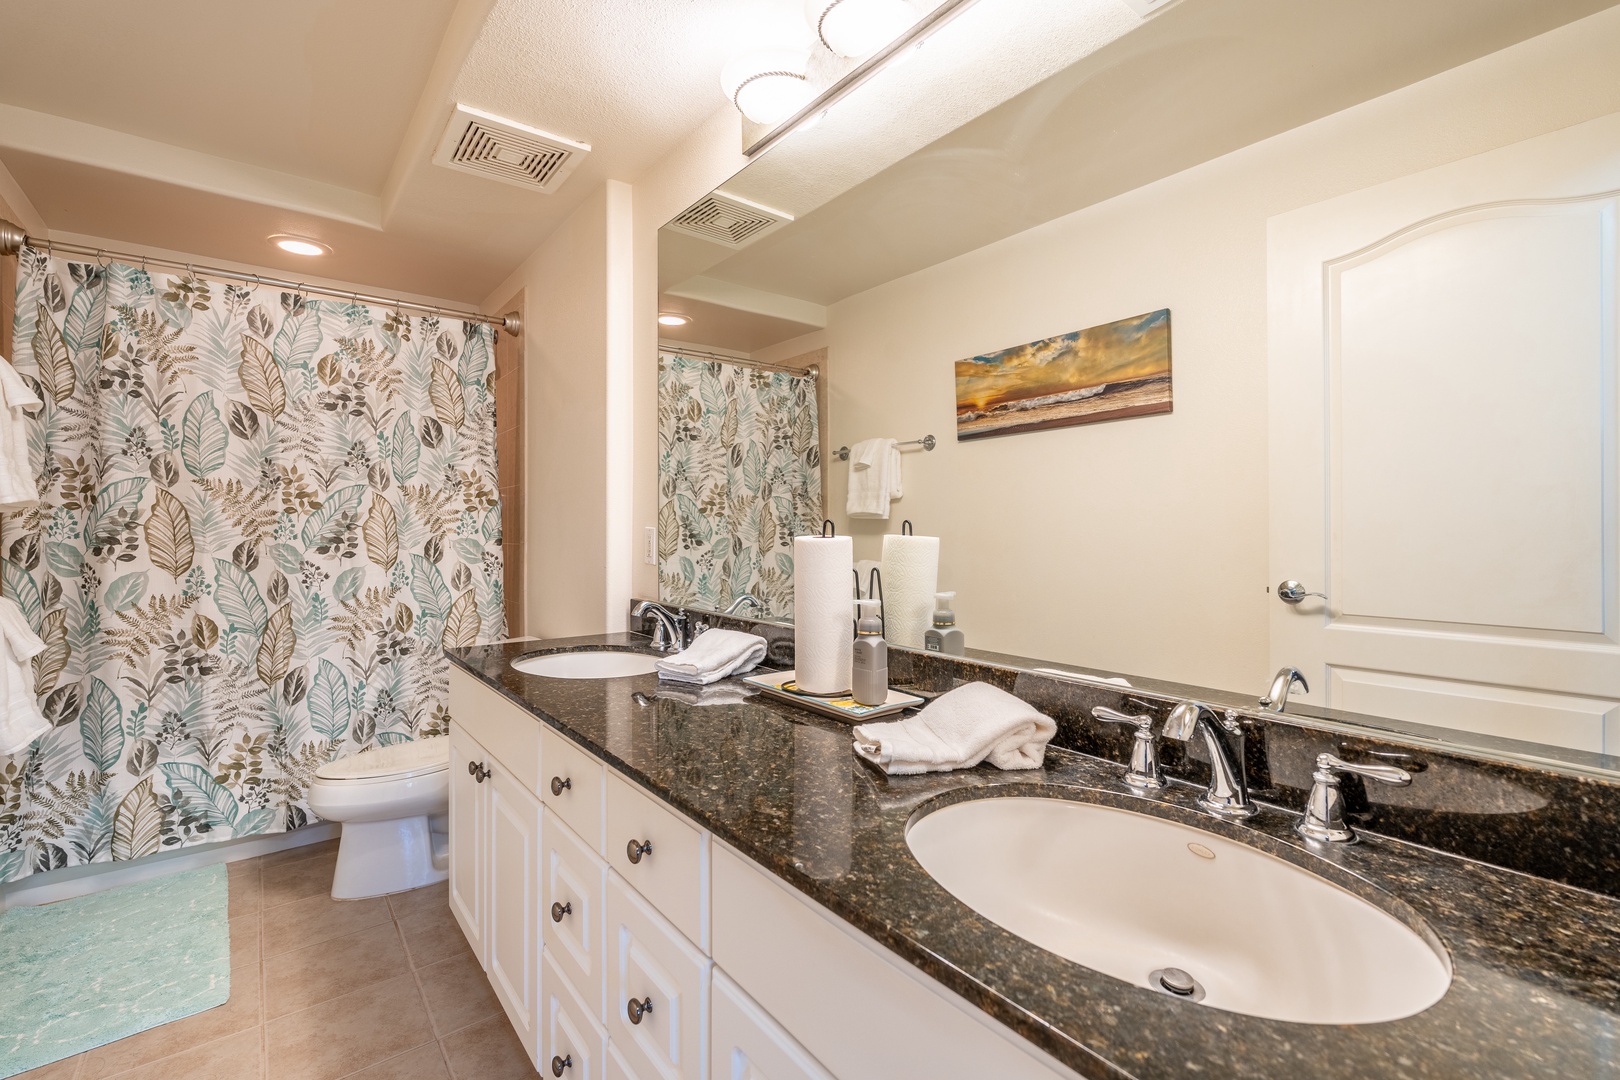 Kapolei Vacation Rentals, Ko Olina Kai 1105F - Spacious ensuite with dual sinks, ample vanity space and a walk-in shower.